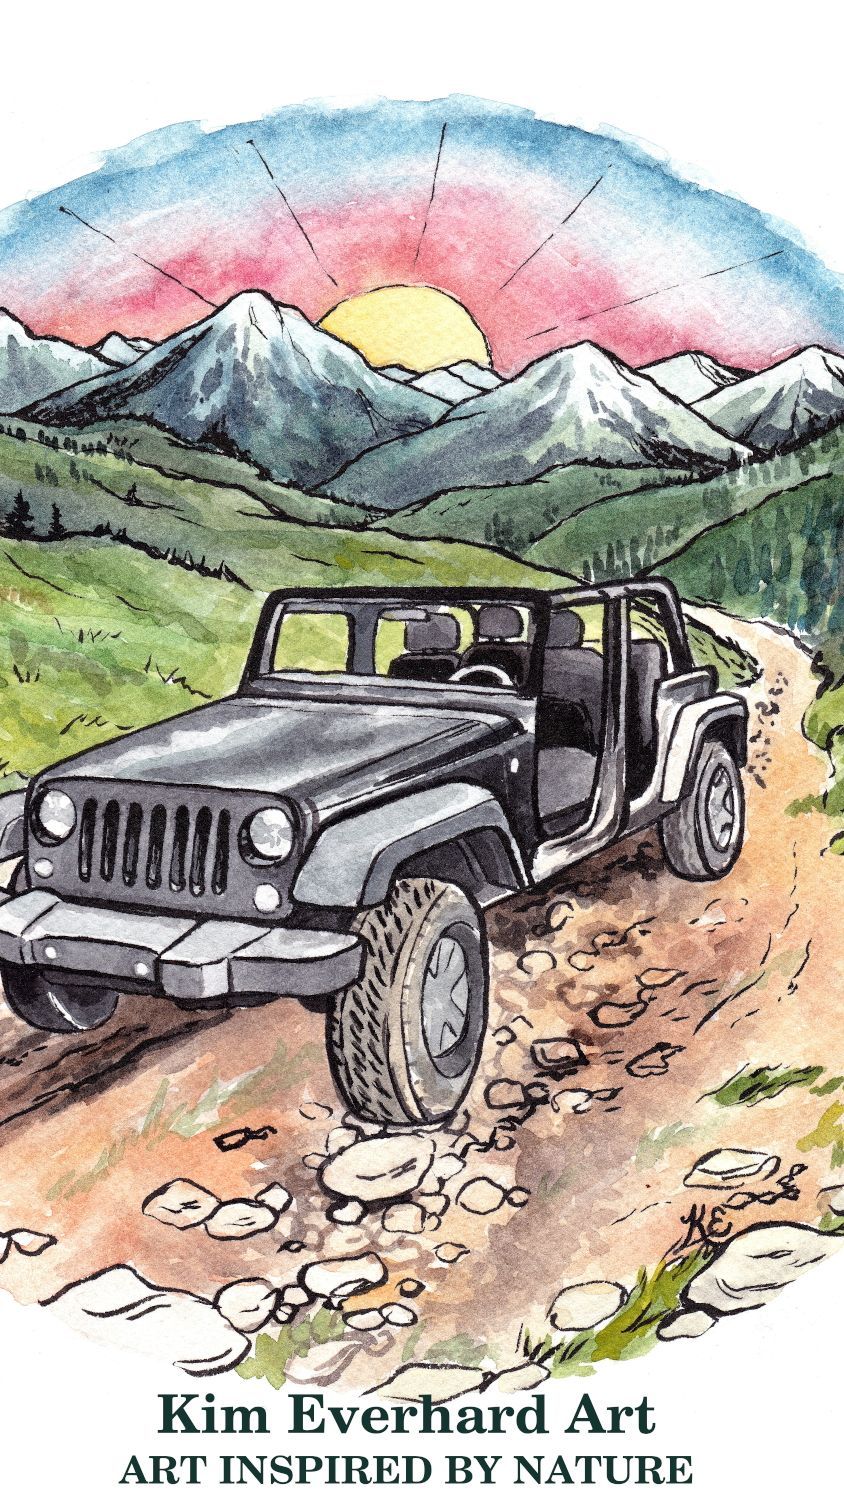 Watercolor Painting - the process, creating a Mountain Road illustration with ink and watercolors. - Watercolor Painting - the process, creating a Mountain Road illustration with ink and watercolors. -   16 beauty Drawings artworks ideas